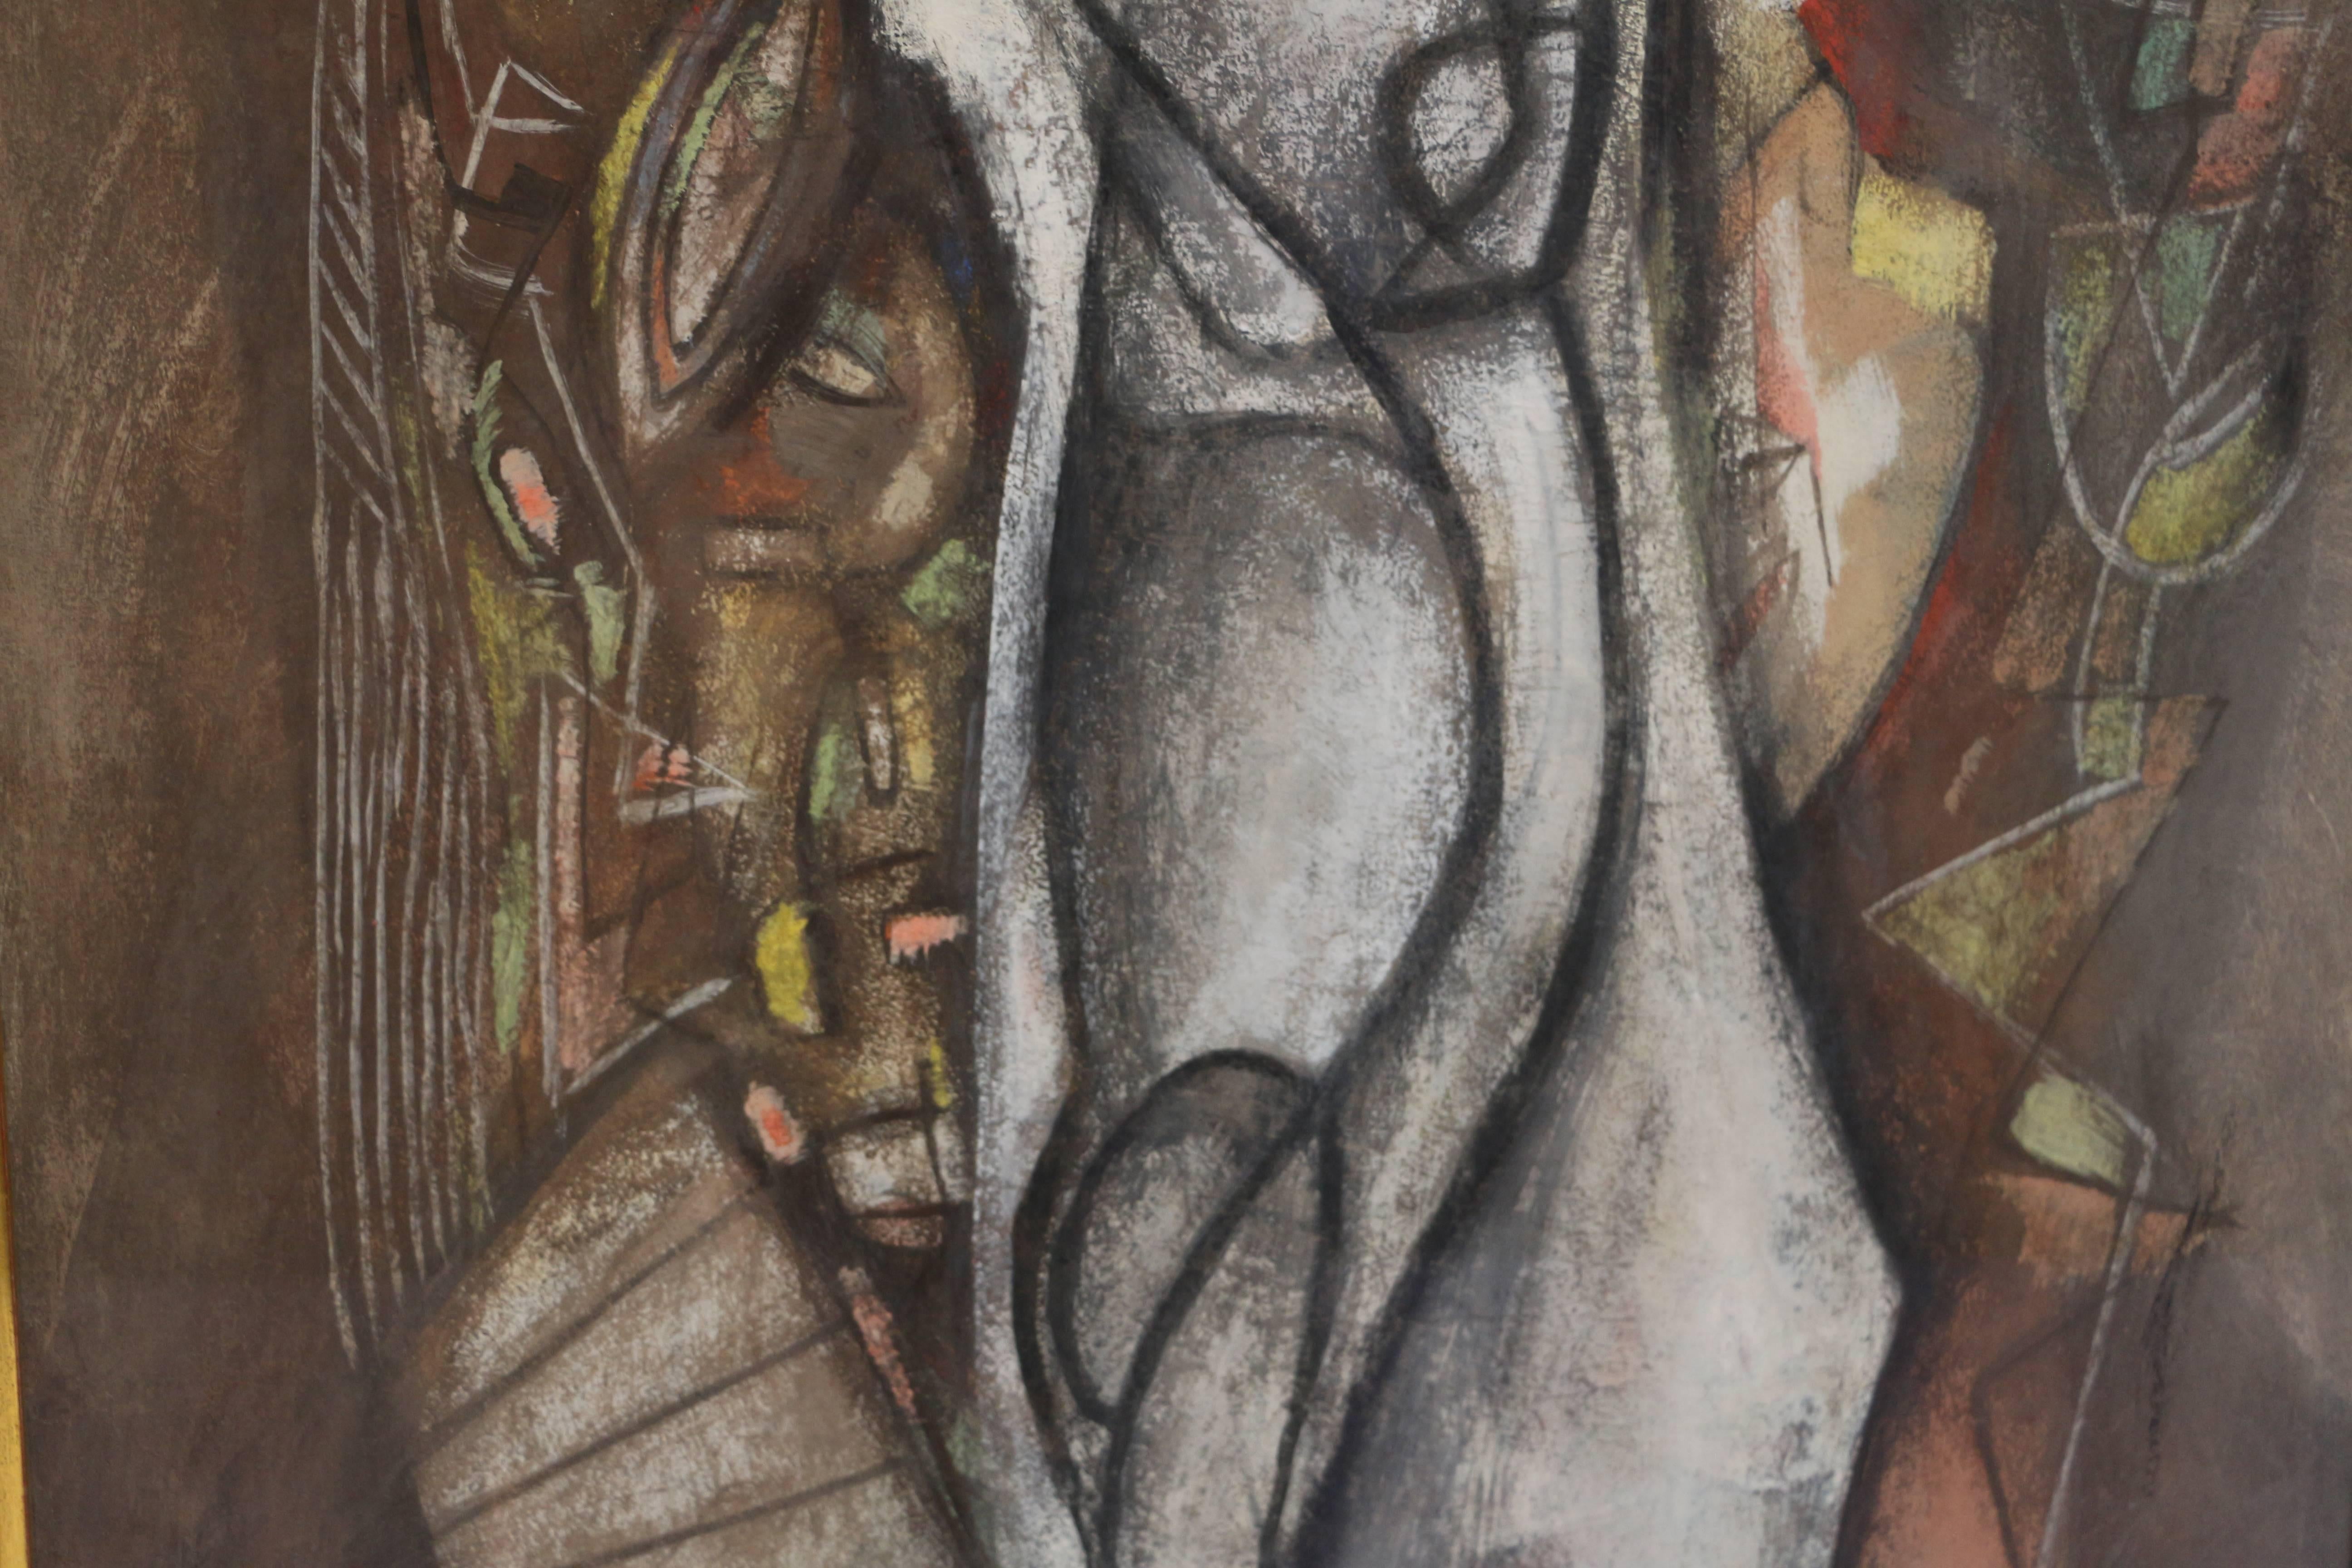 This original gouache on paper composition depicts a figure in the center of the work with some shapes in the background. The composition is in the Cubist style and displays colorful and geometric patterns in the background. 

Béla Kádár was born in